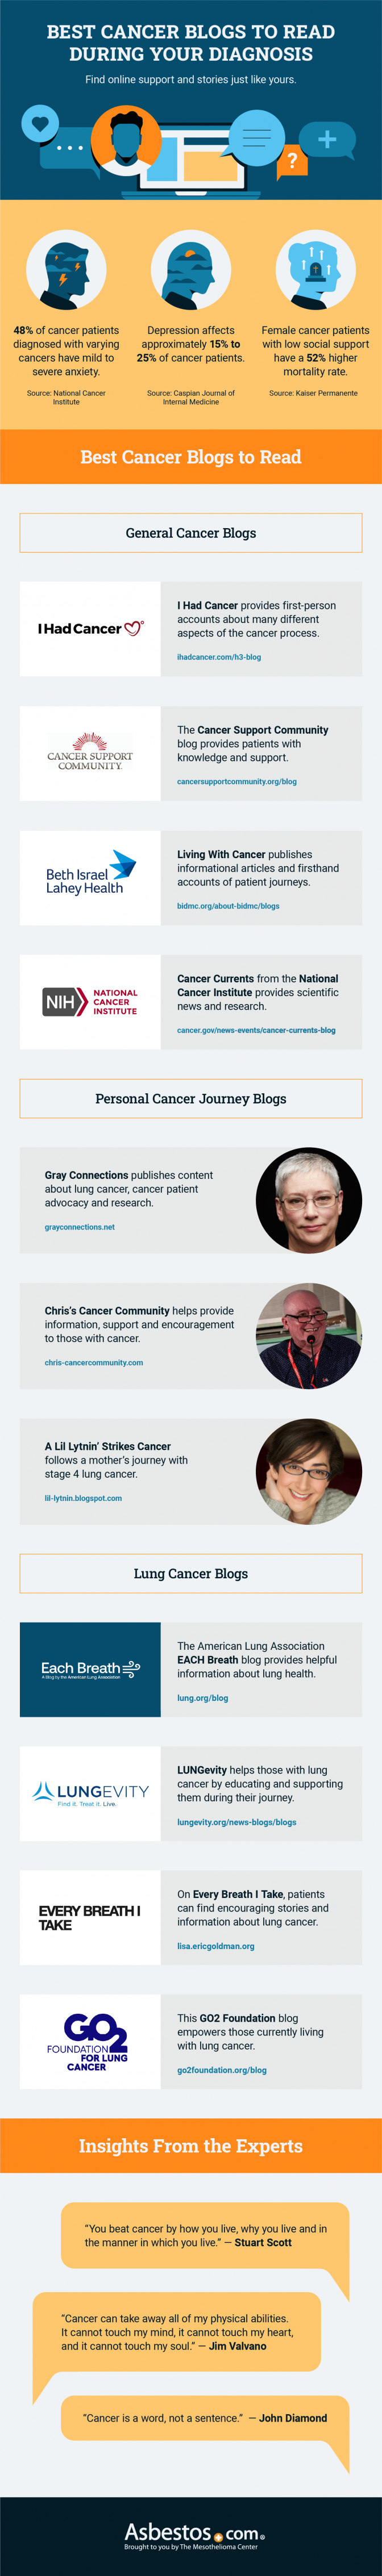 Best cancer blogs to read infographic